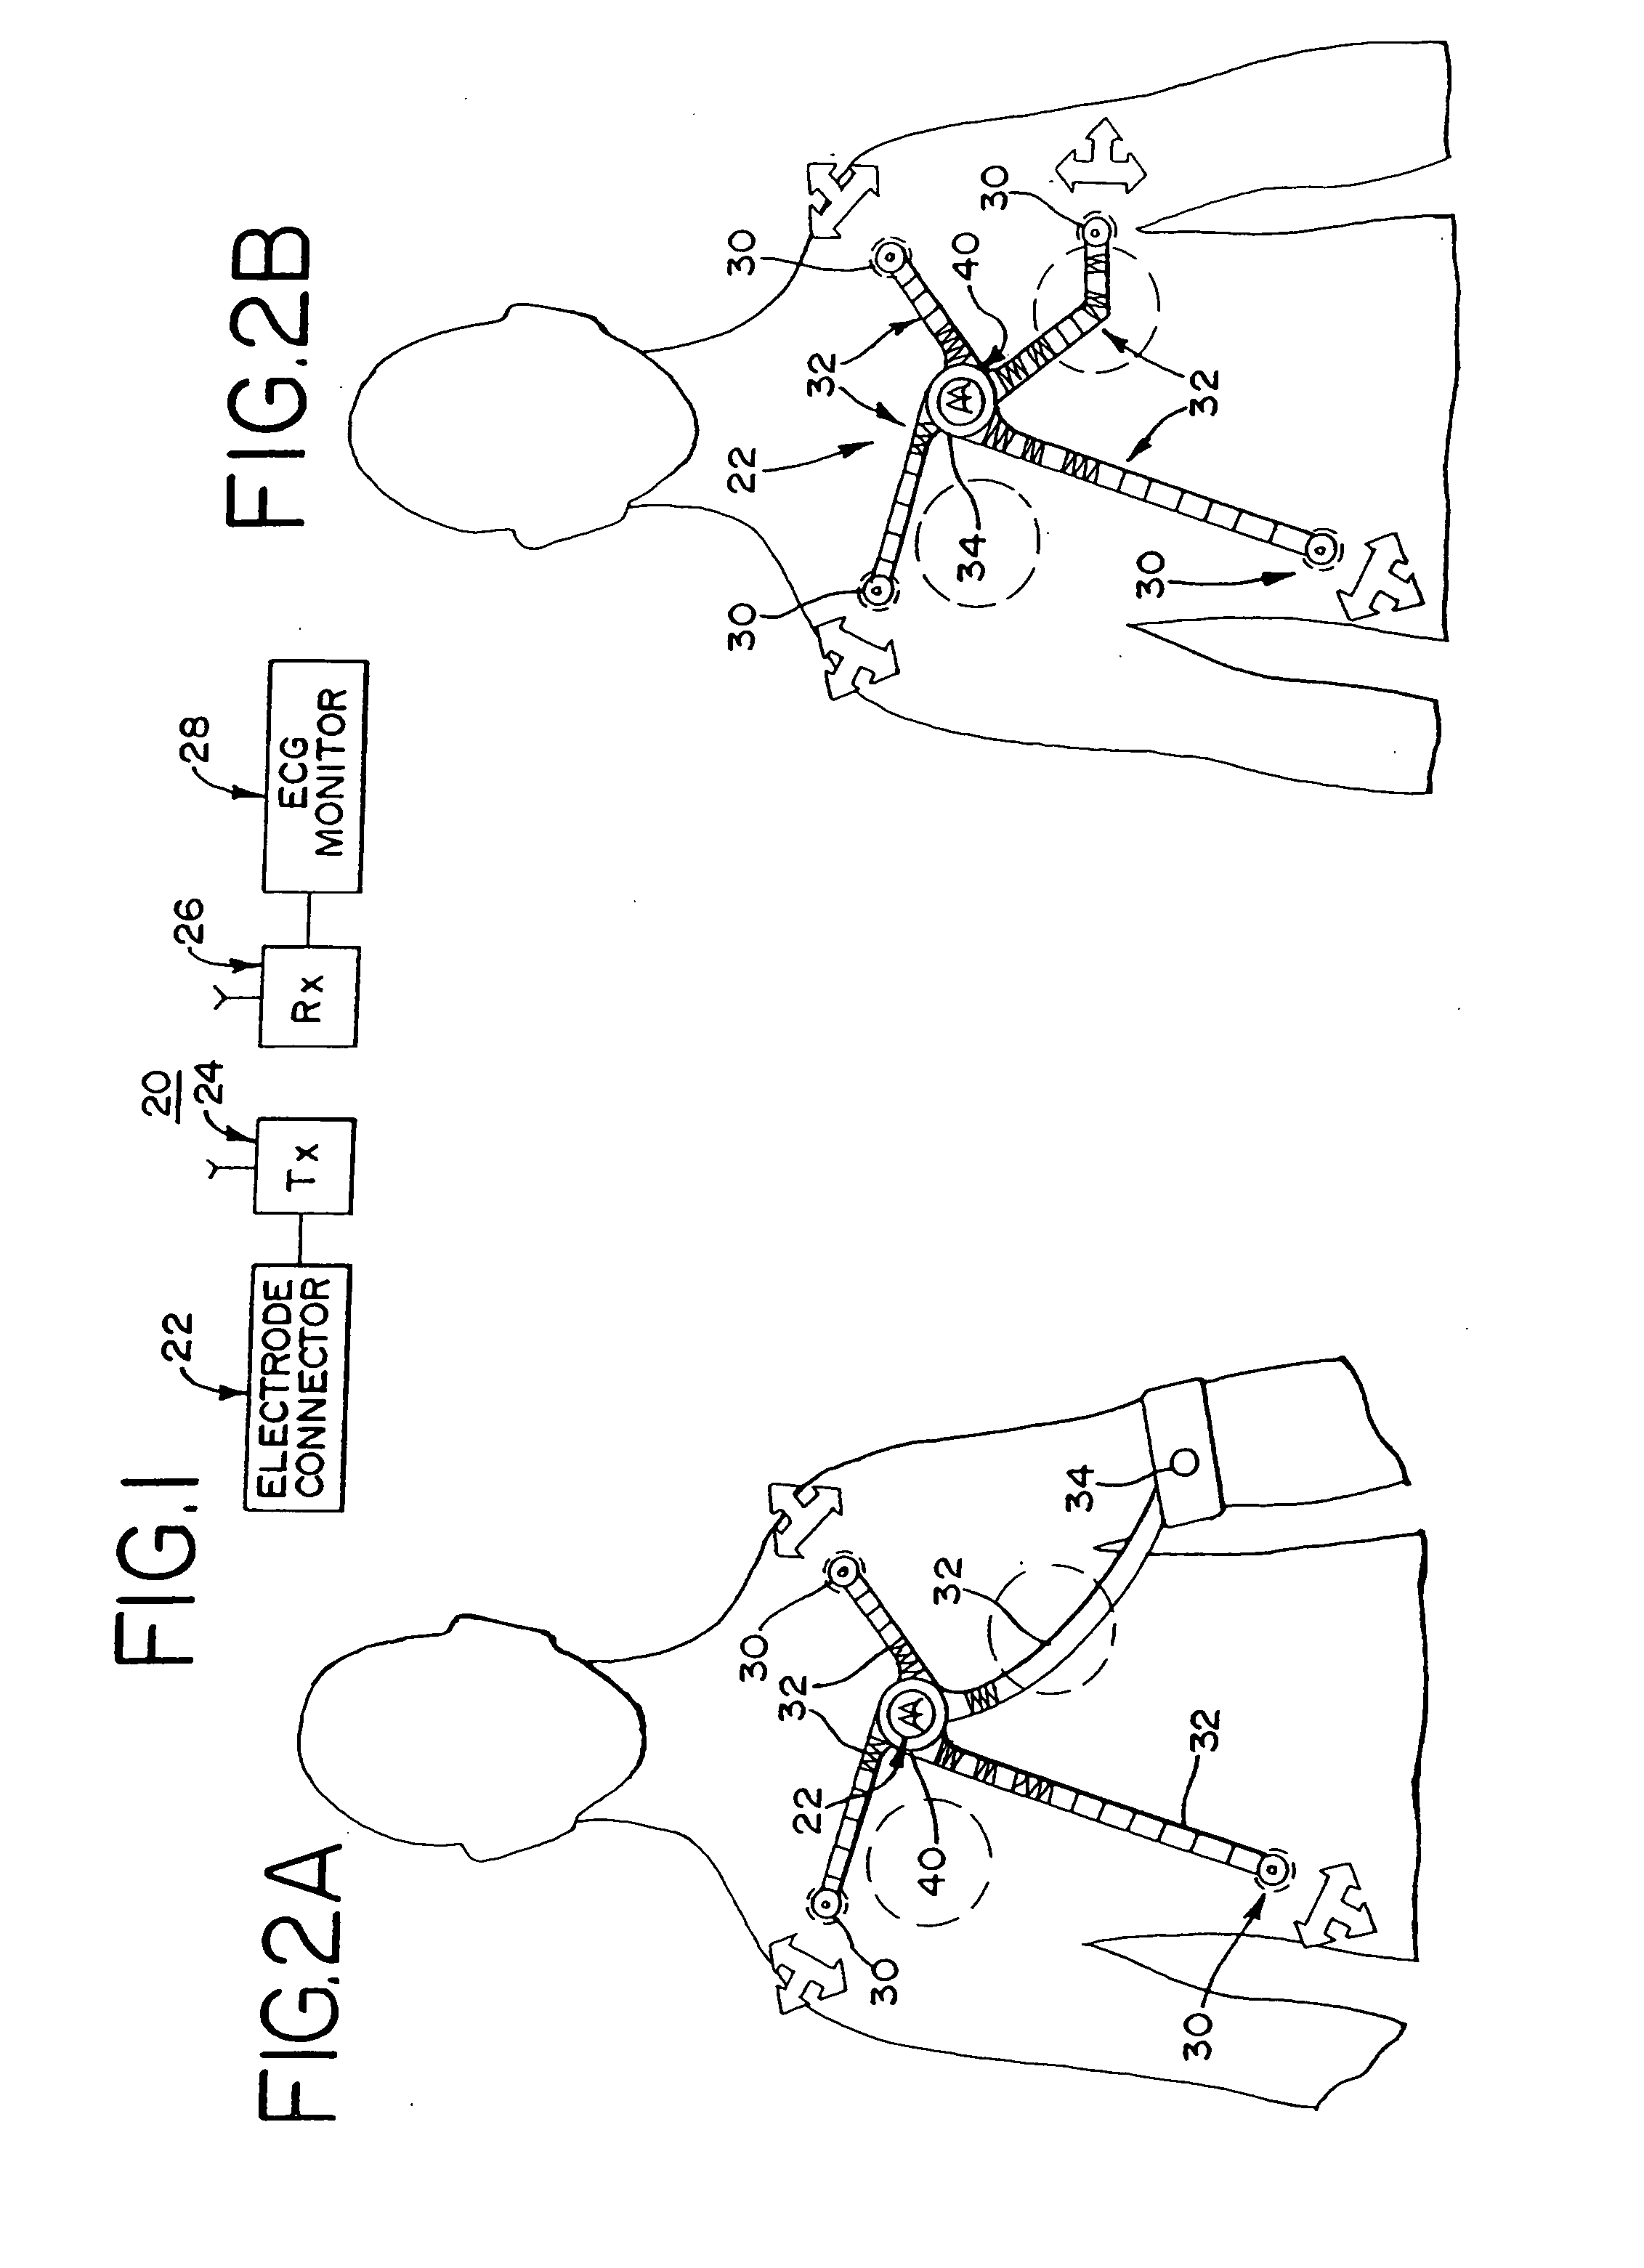 Wireless electrocardiograph system and method